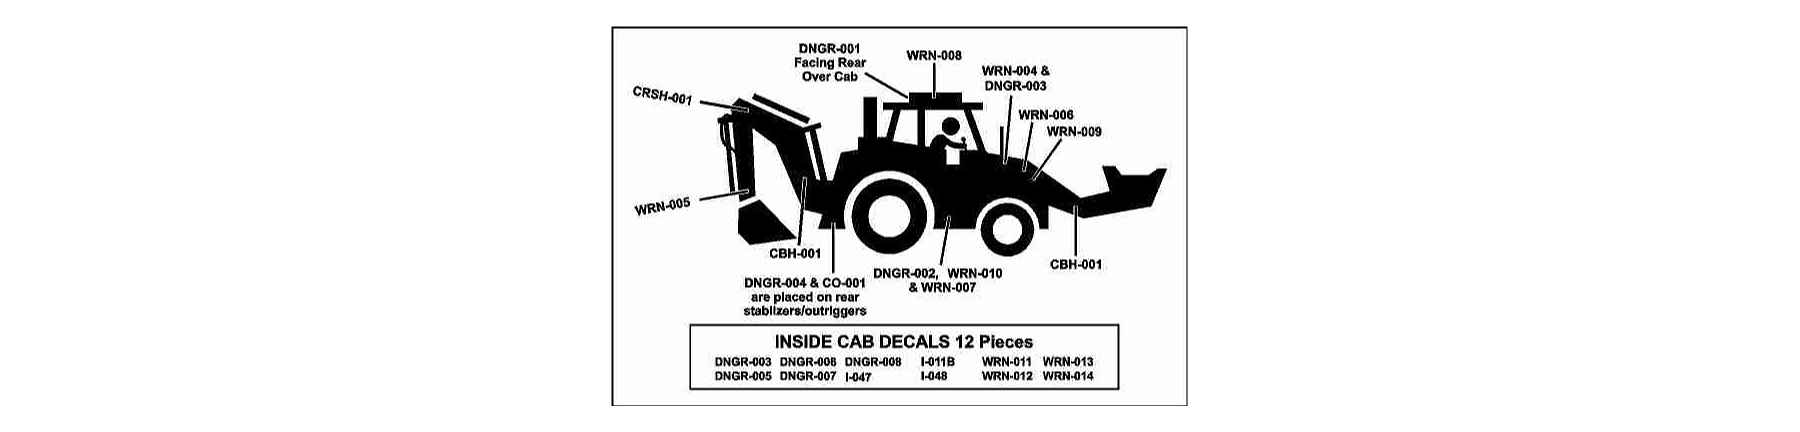 Backhoe Warning Safety Sticker Part Numbers and Positions.